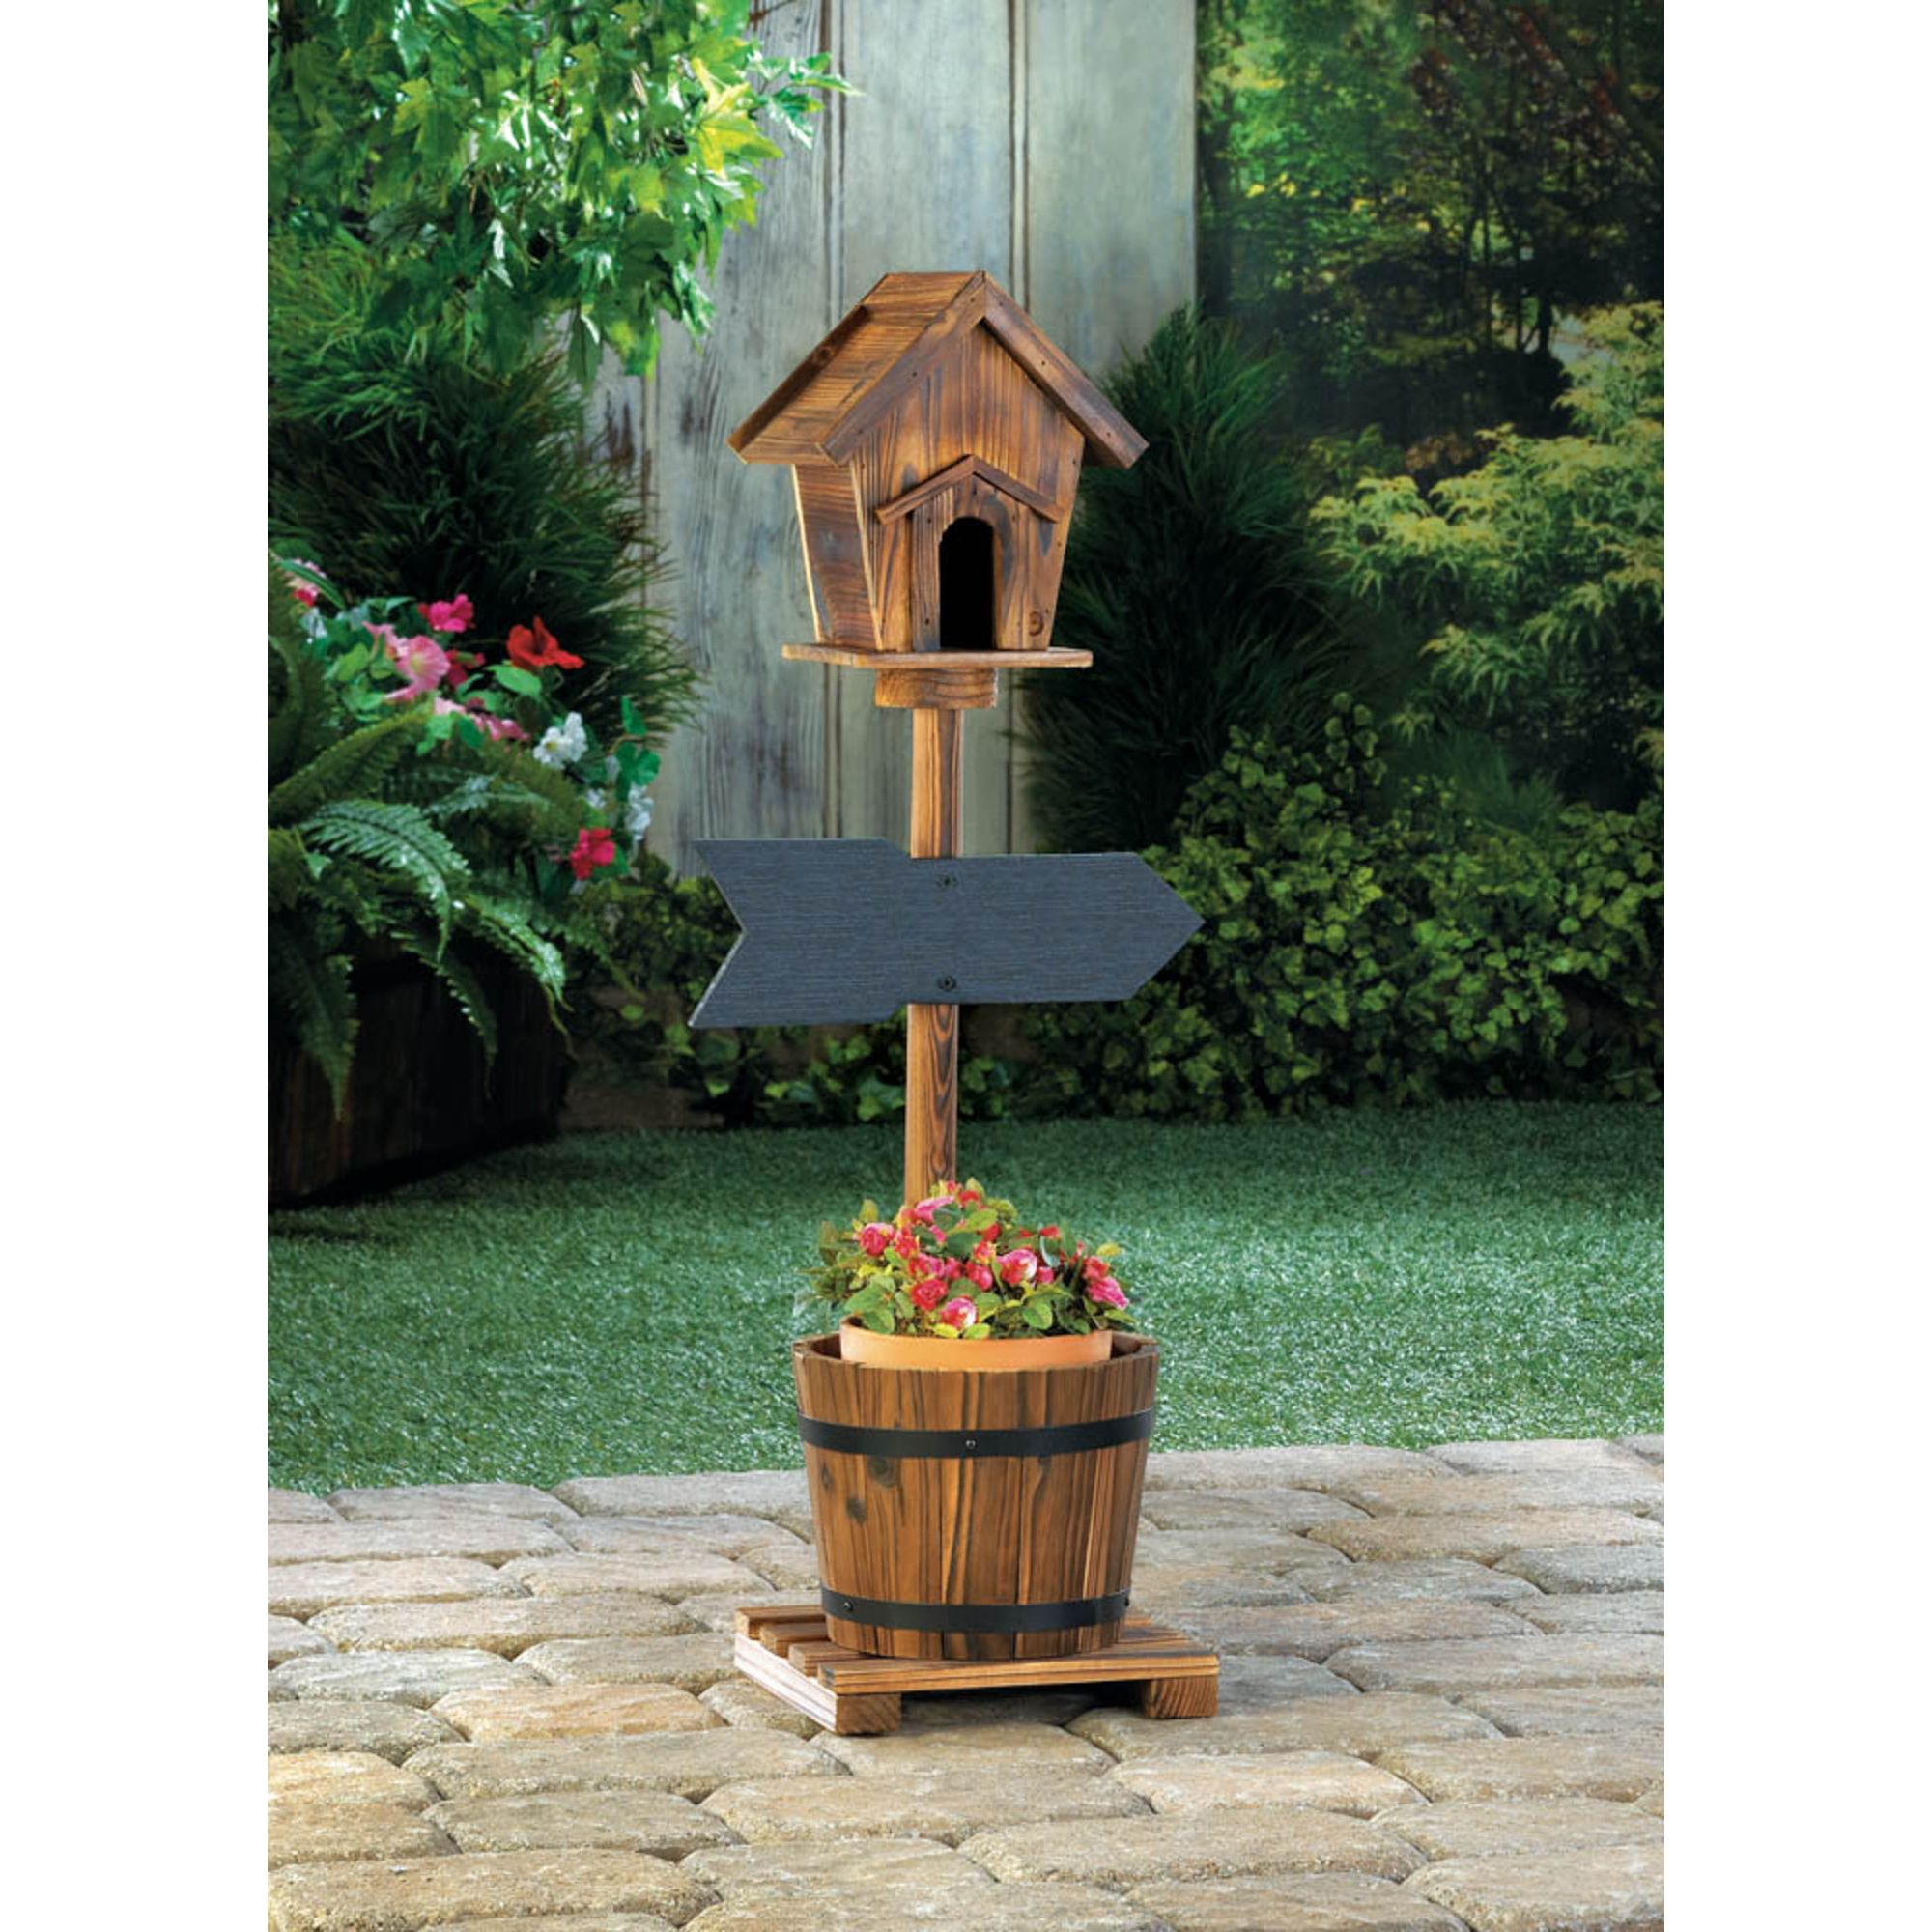 Zingz & Thingz Wooden Welcome Birdhouse Rustic Barrel Planter in Brown - image 3 of 4